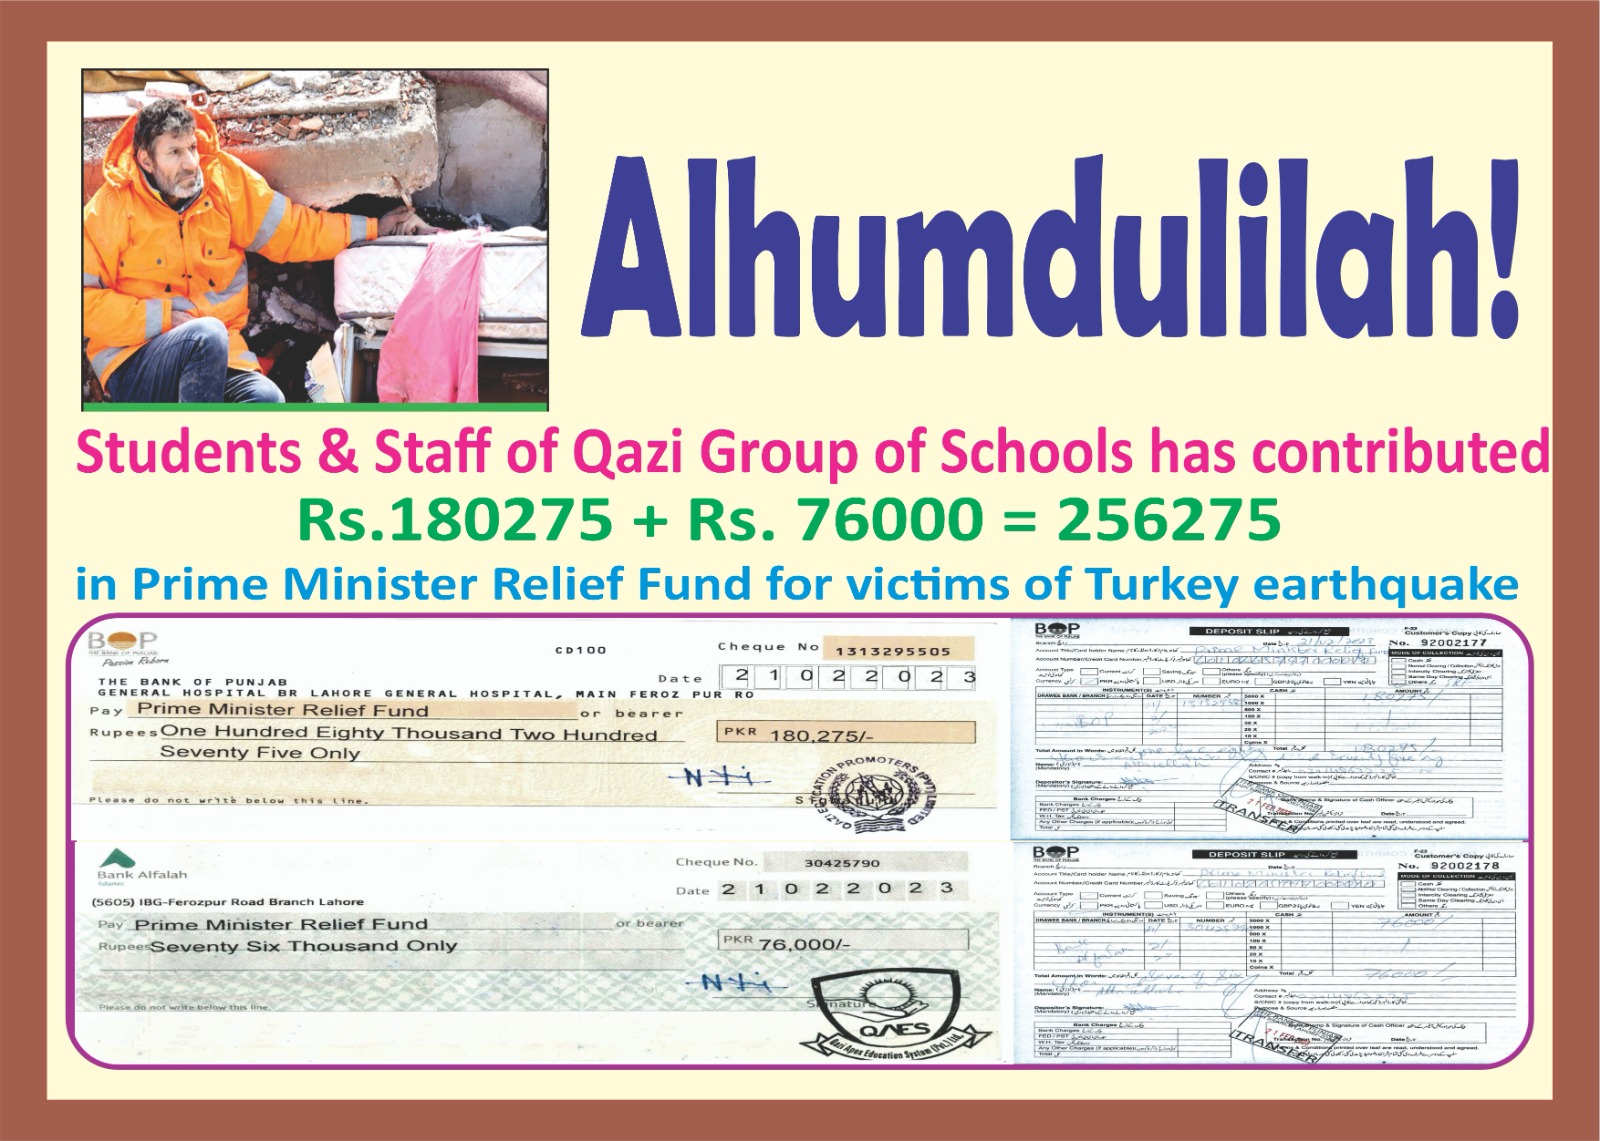 Qazi Group of Schools contributed Rs. 180275 for victims of Turkey Earthquake